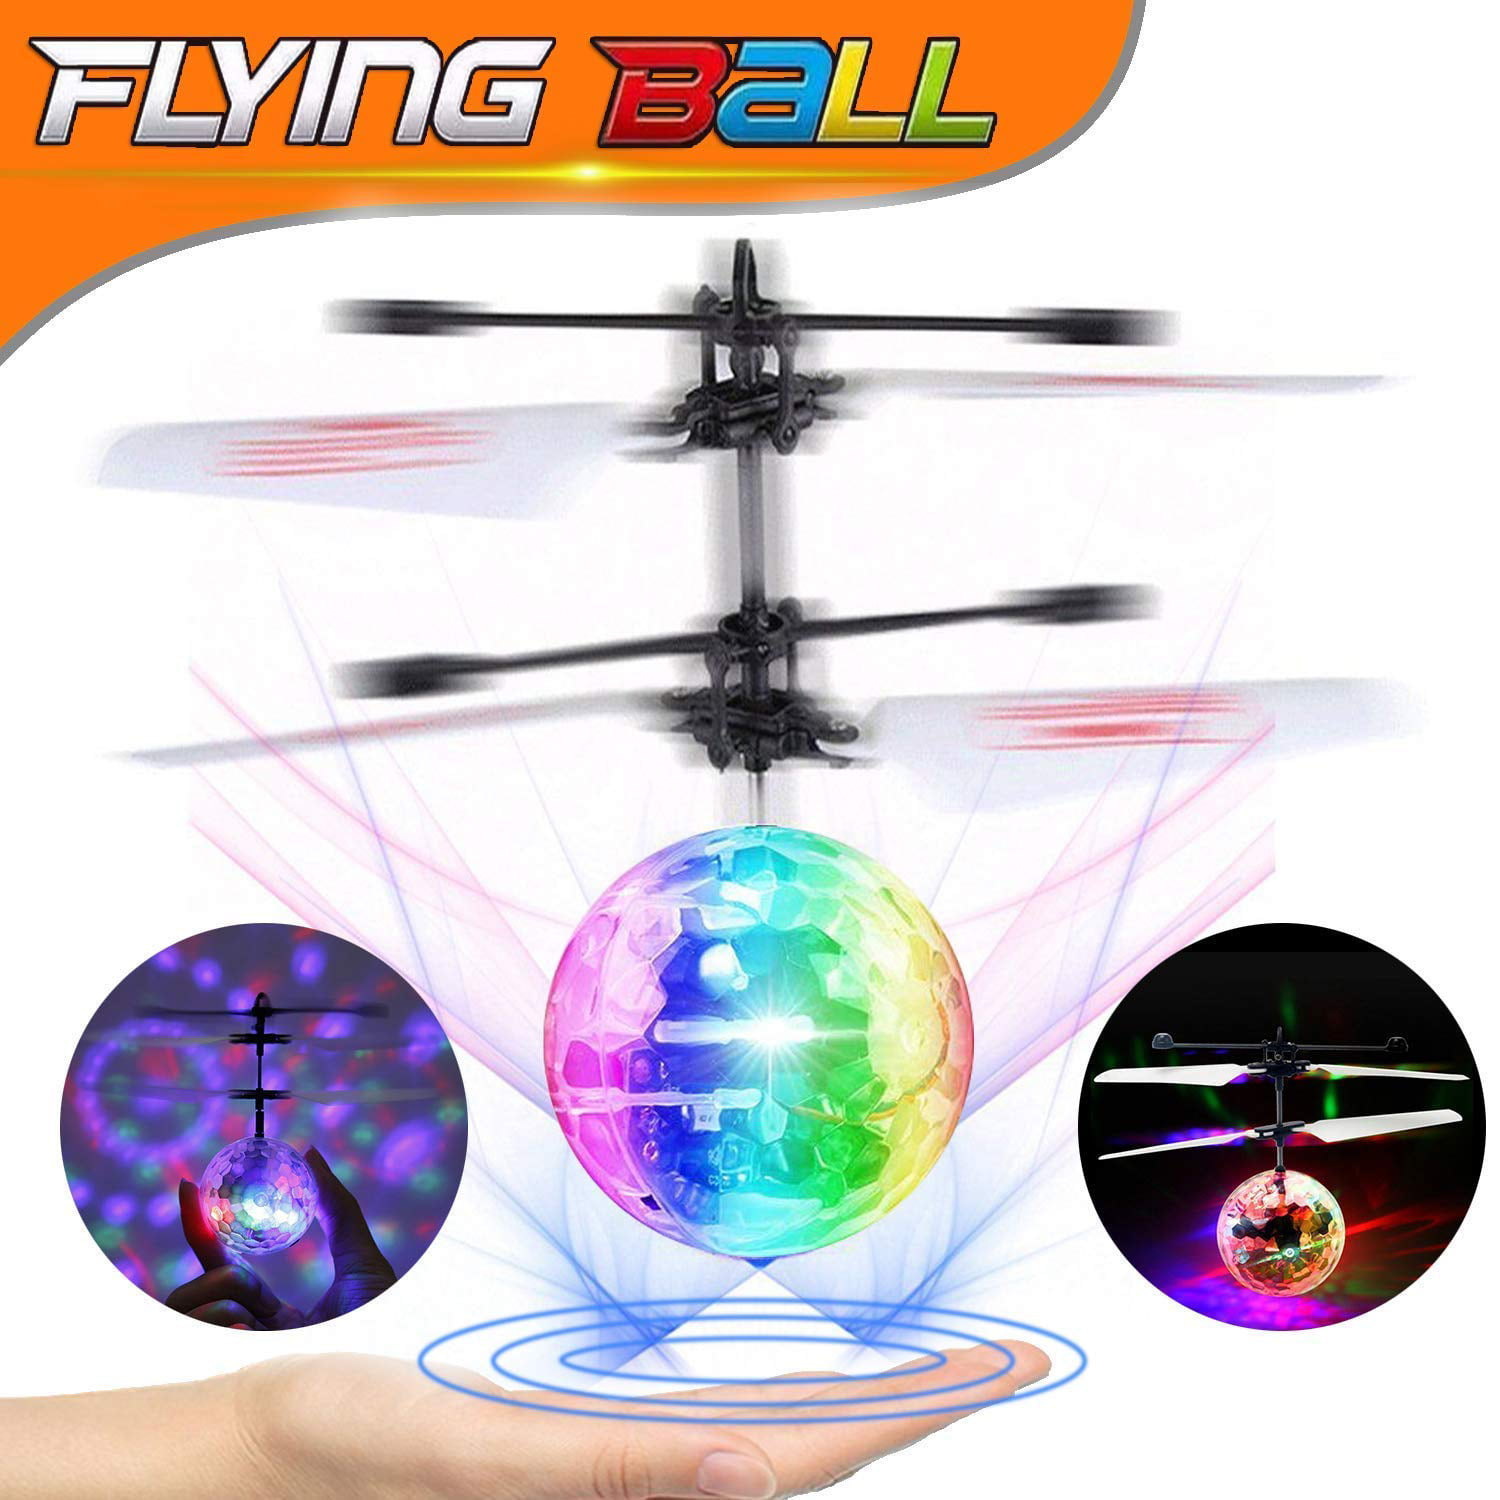 Infrared Induction Drone Helicopter with Shinning LED Light Hand-Controlled Flying Kids Toy for Above Age 6 Boys and Girls for Outdoor Indoor SYLOTS Flying Ball Bee Toys 